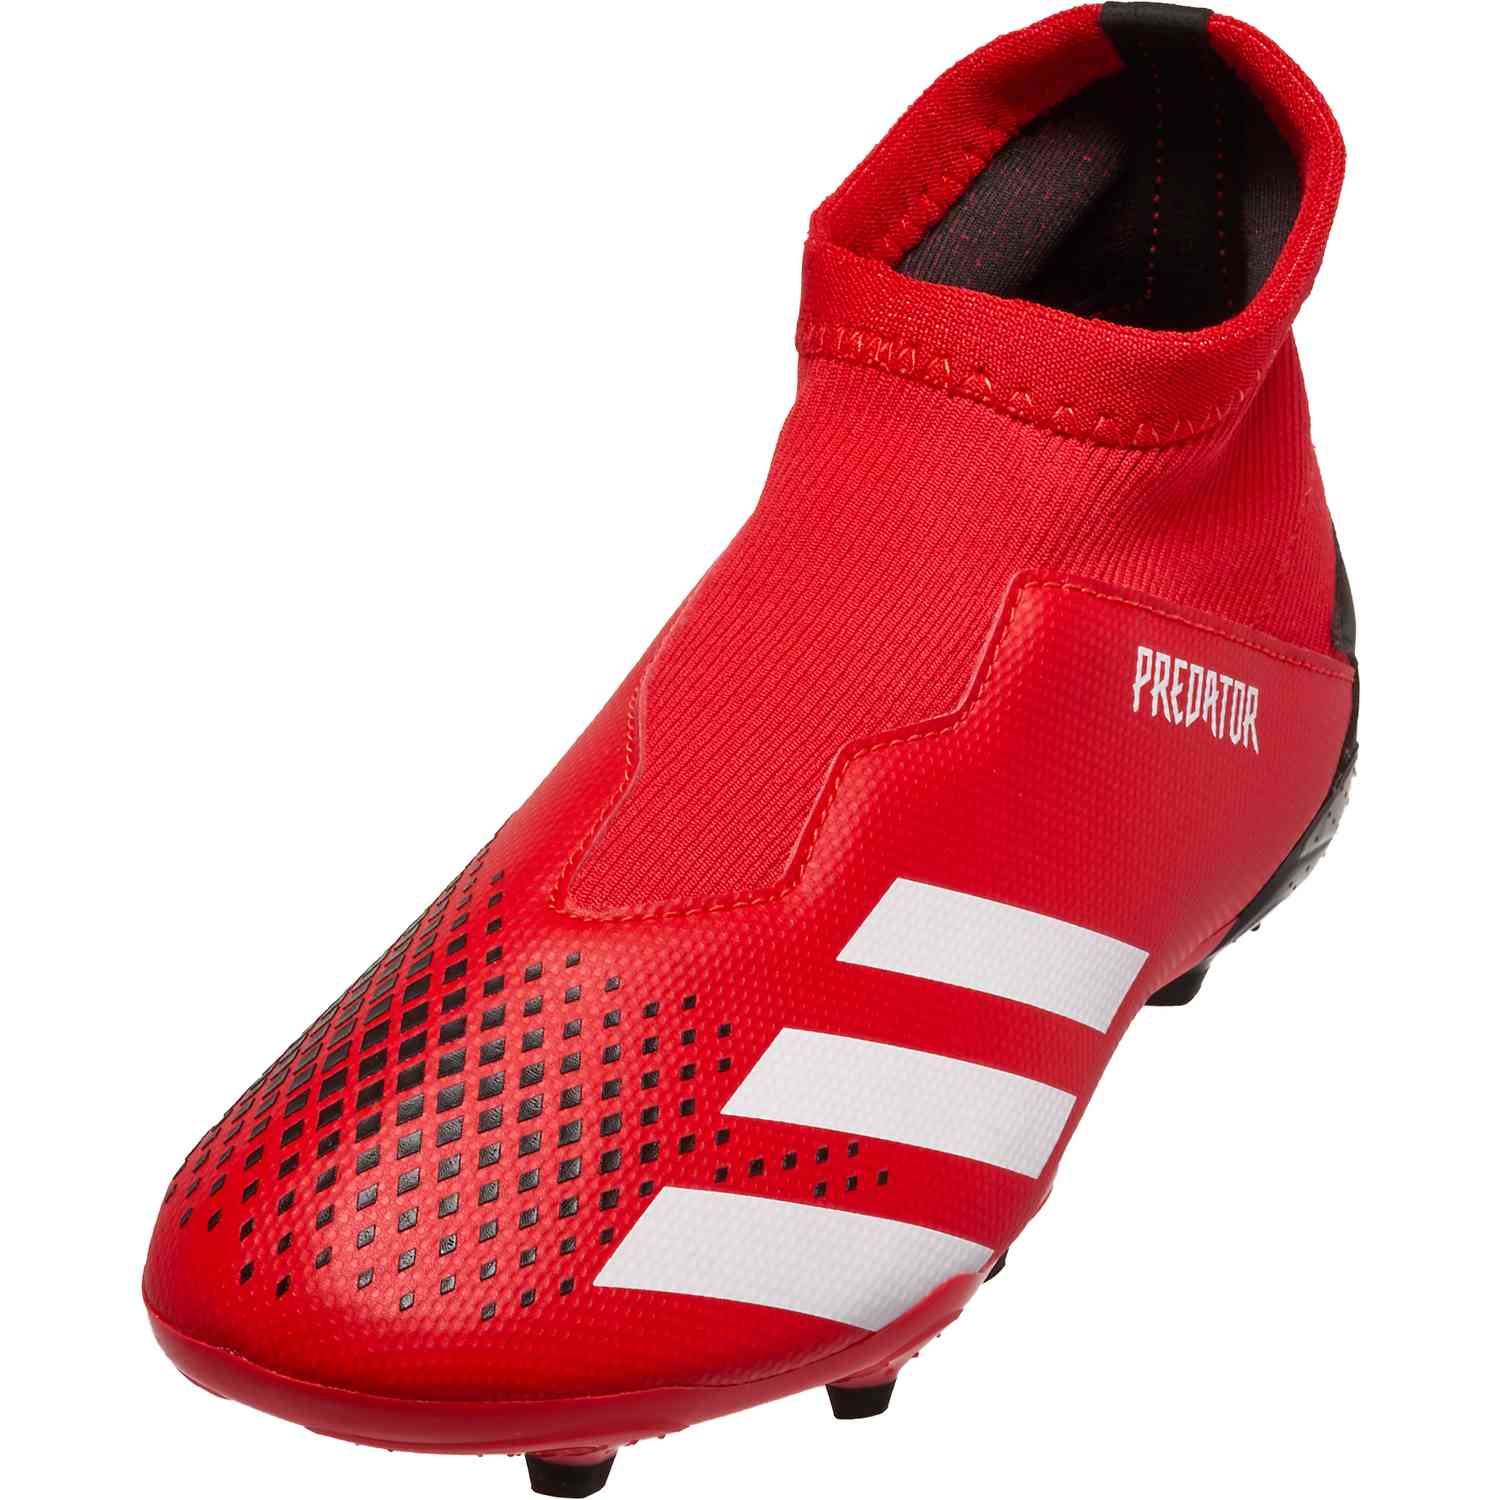 laceless youth soccer cleats